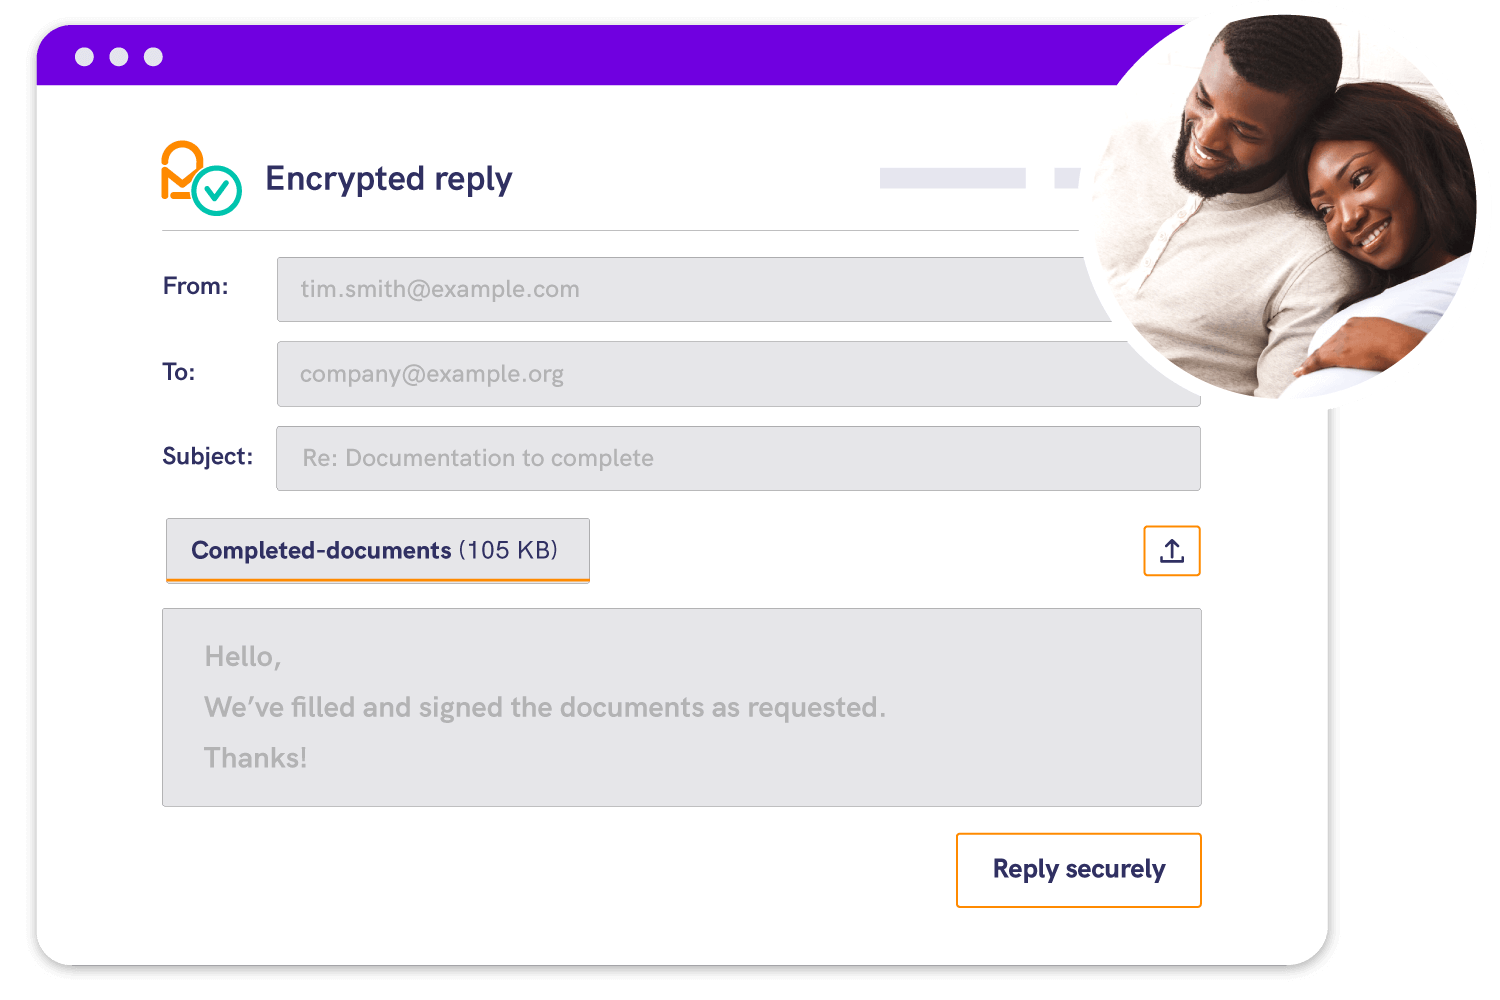 Customers replying to encrypted email